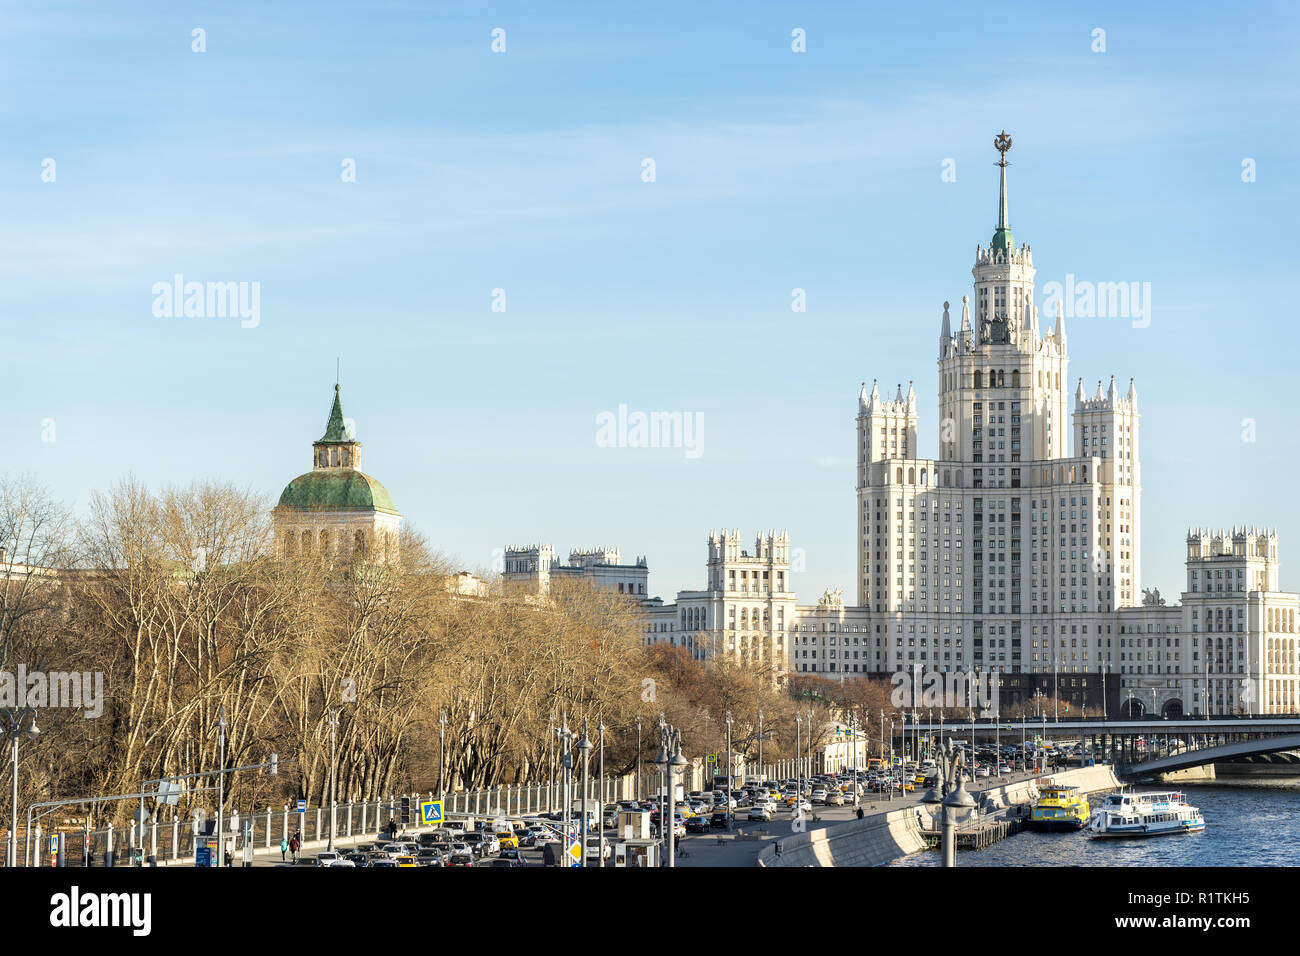 Moscow, Russia - November 13, 2018: View on Kotelnicheskaya Embankment Building, Moscow River, and cars in a traffic jam on Moskvoretskaya Embankment Stock Photo